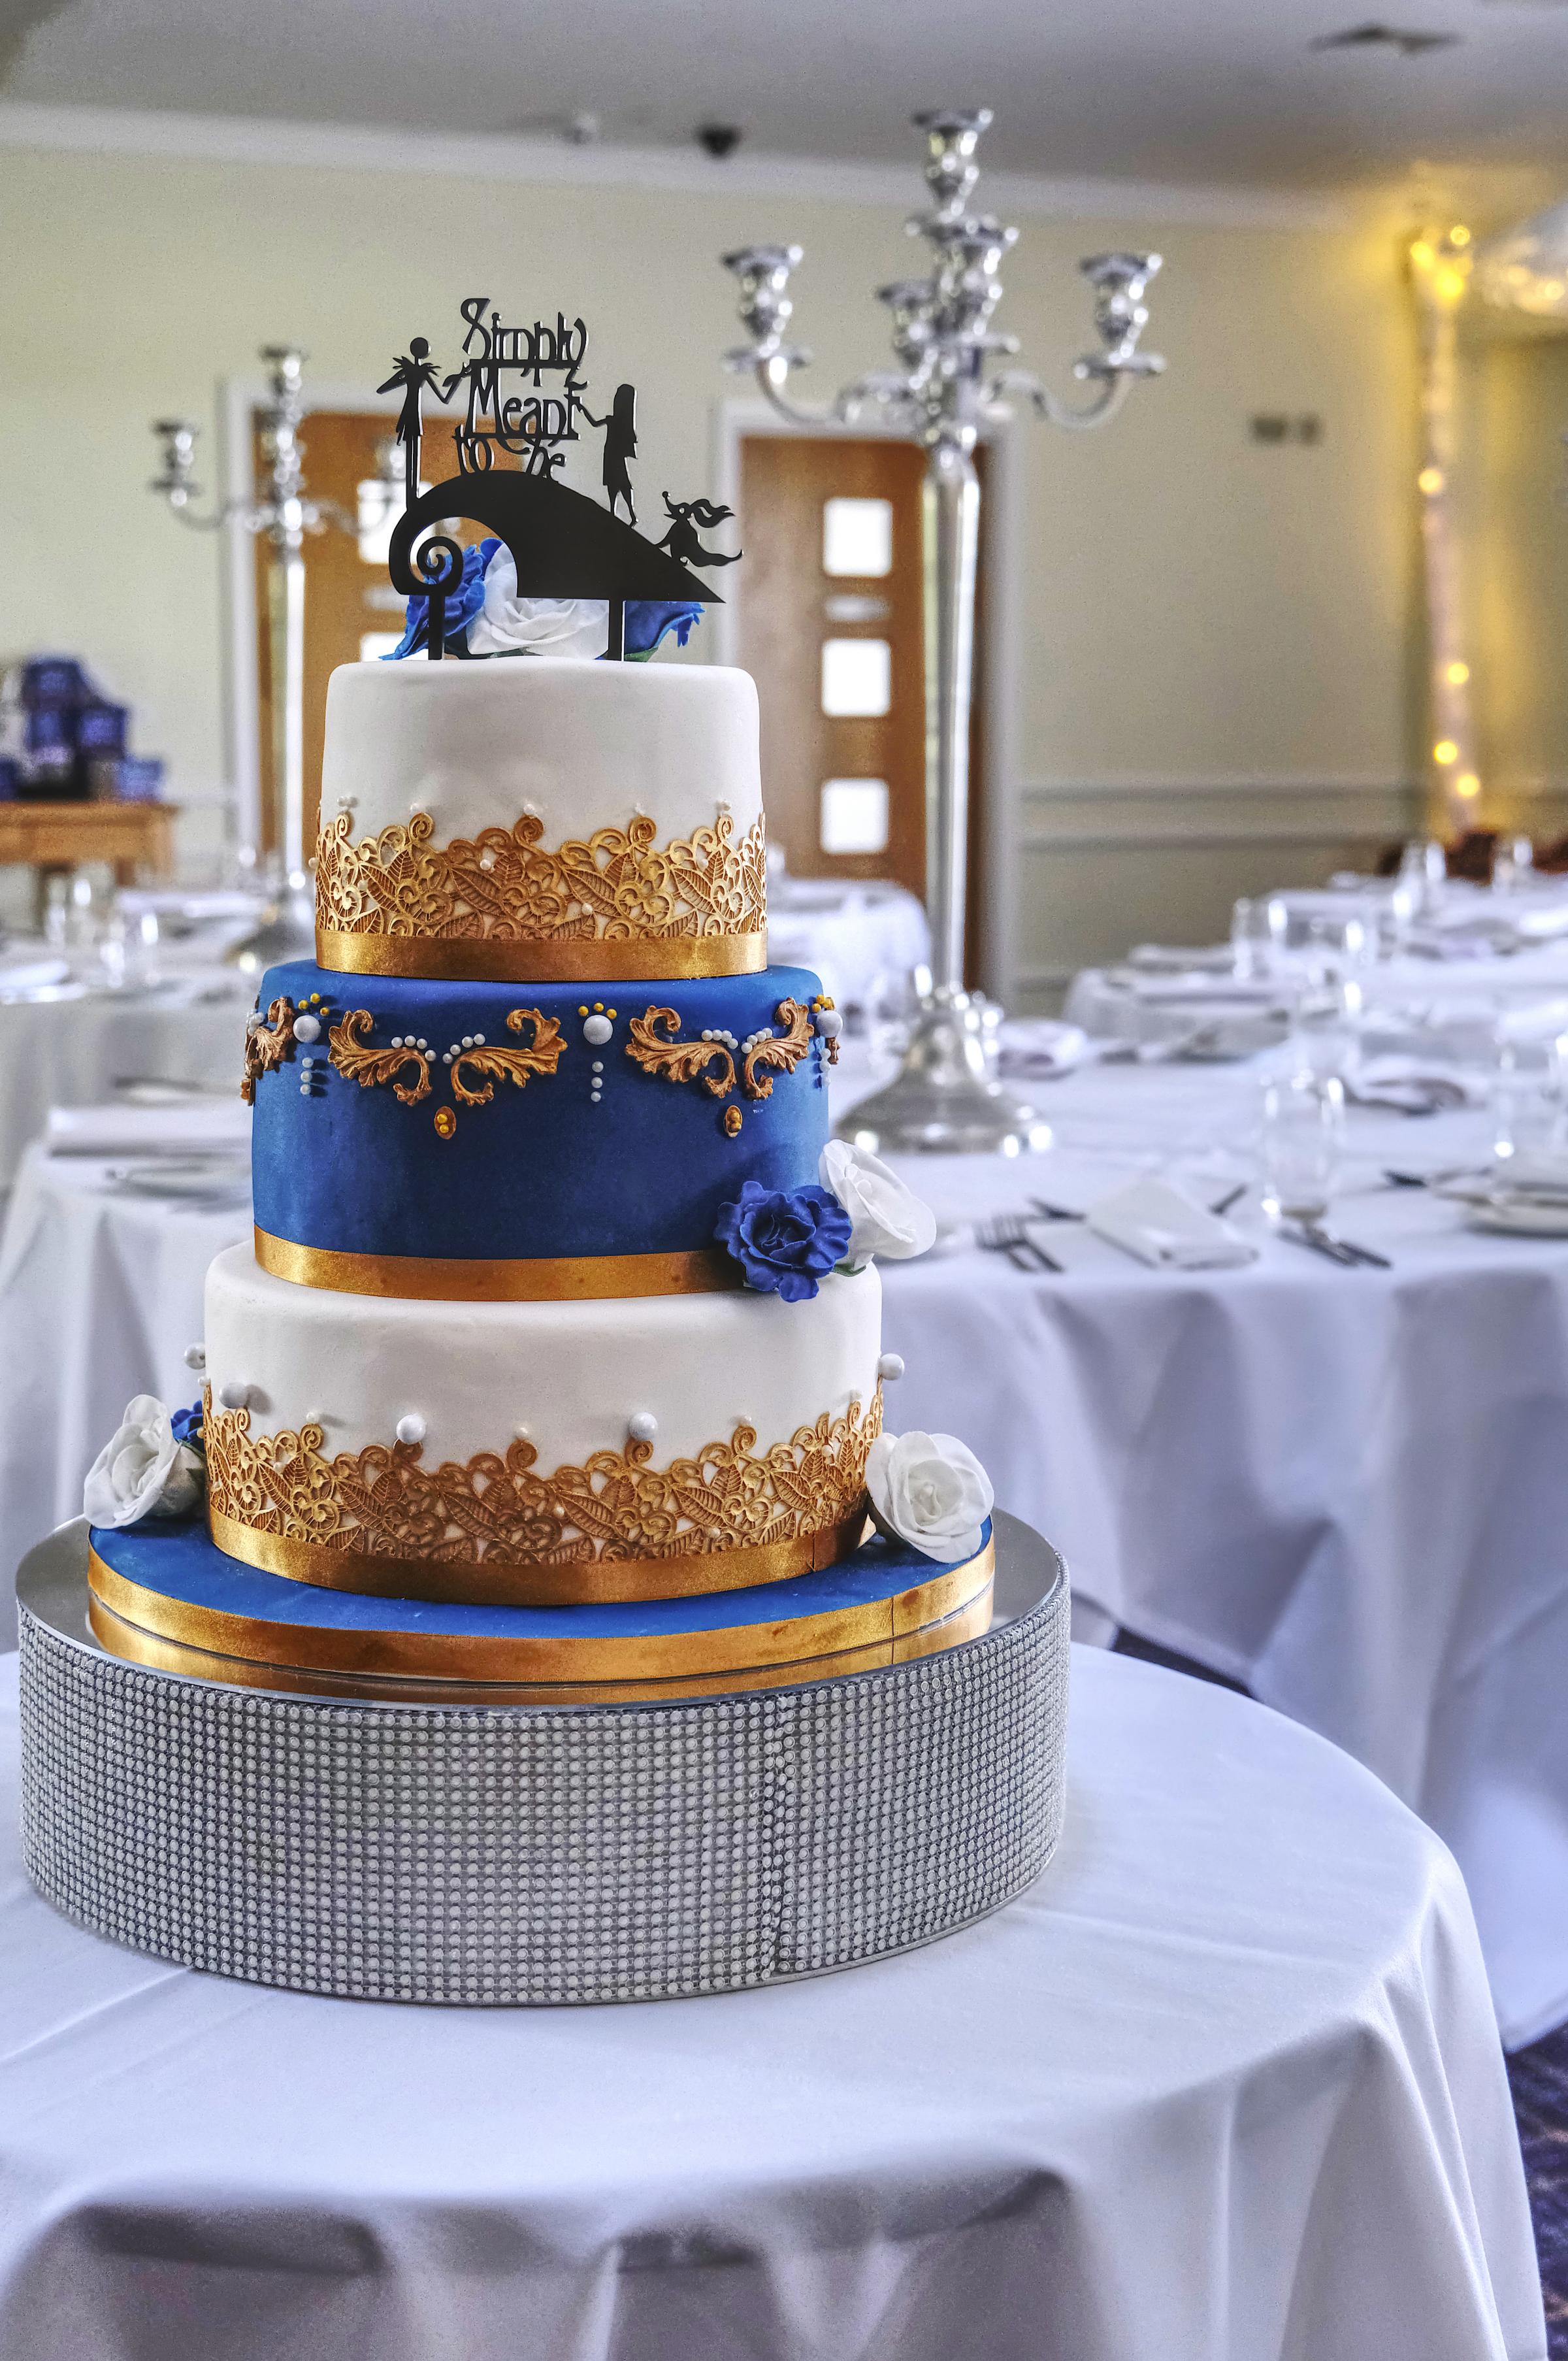 The Beauty and the Beast inspired wedding cake